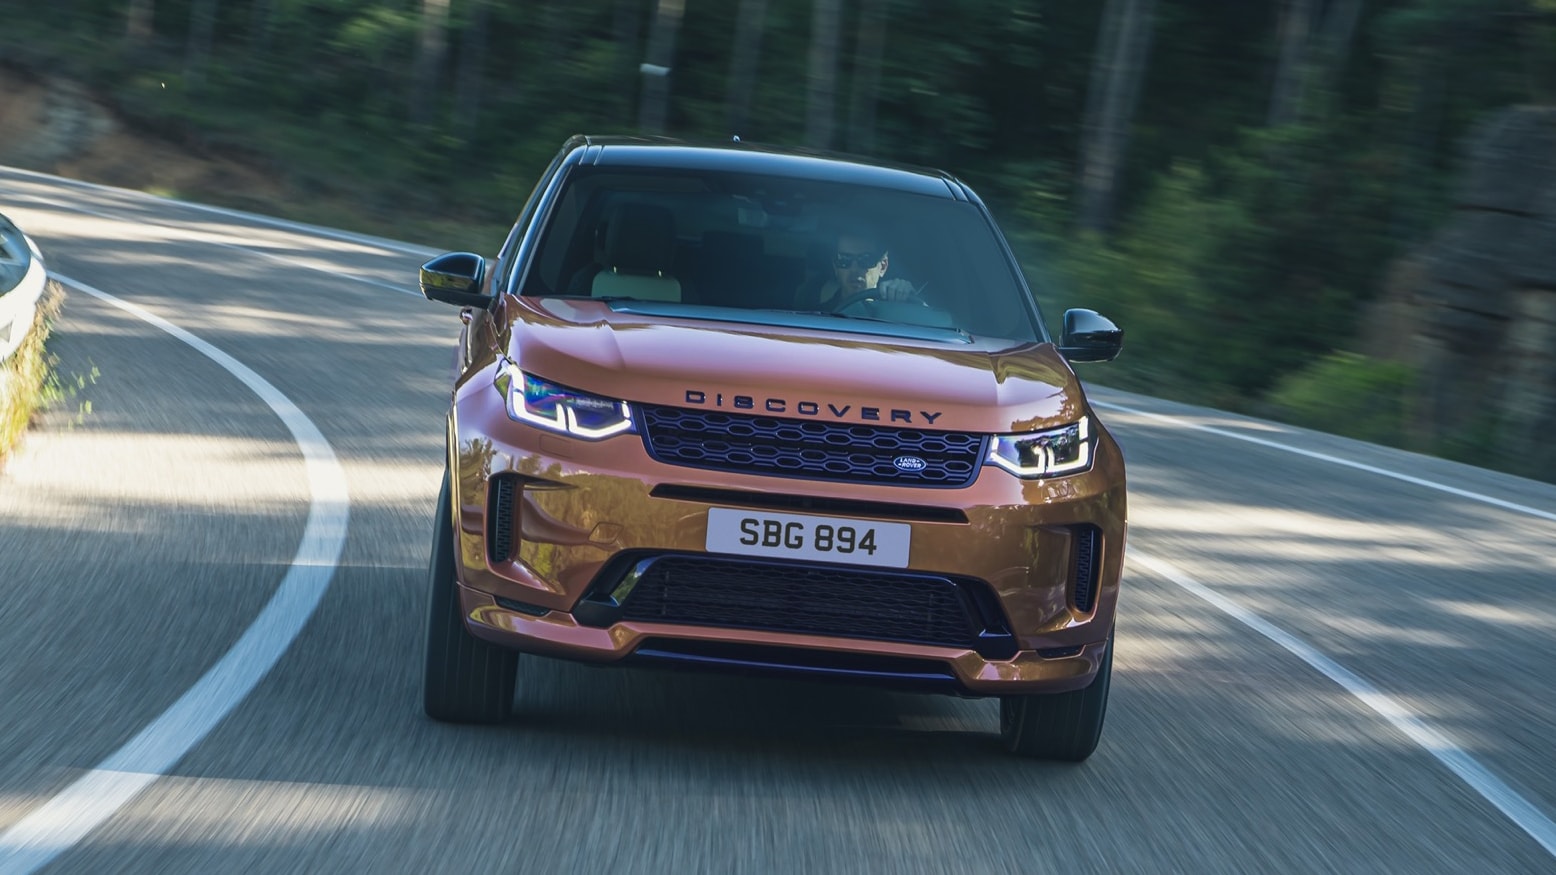 2021 Land Rover Discovery Sport Prices, Reviews, and Photos - MotorTrend